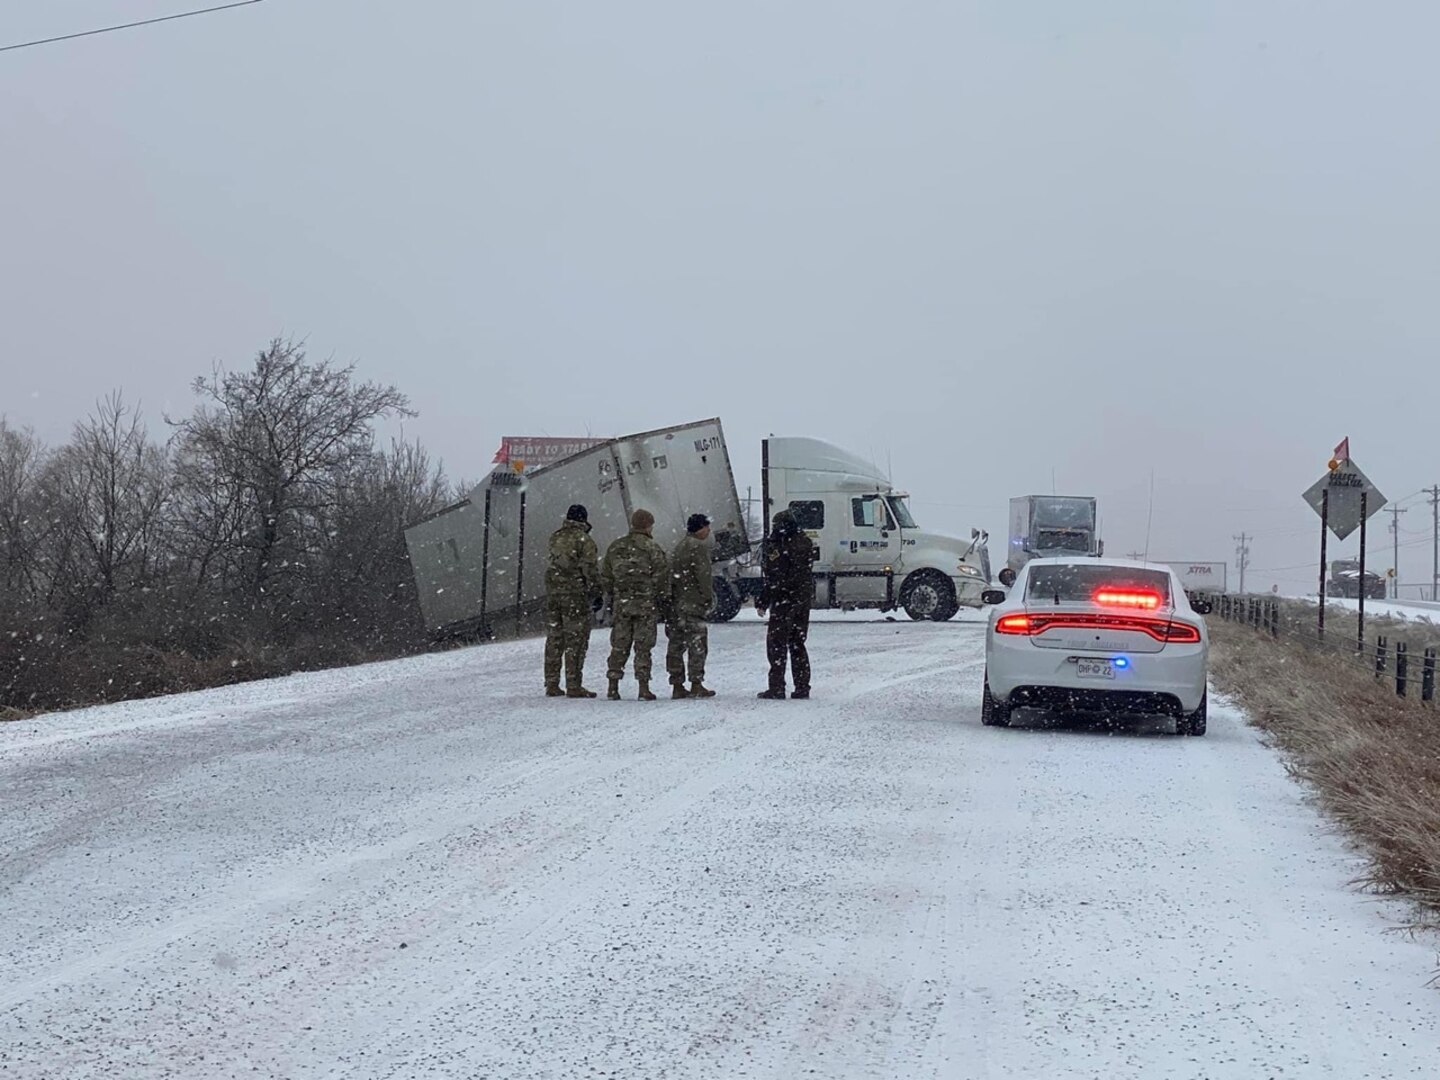 Oklahoma National Guard members help Oklahoma Highway Patrol officers prevent a semi-truck from rolling over during recovery operations in Calera, Oklahoma, Feb. 3, 2022.